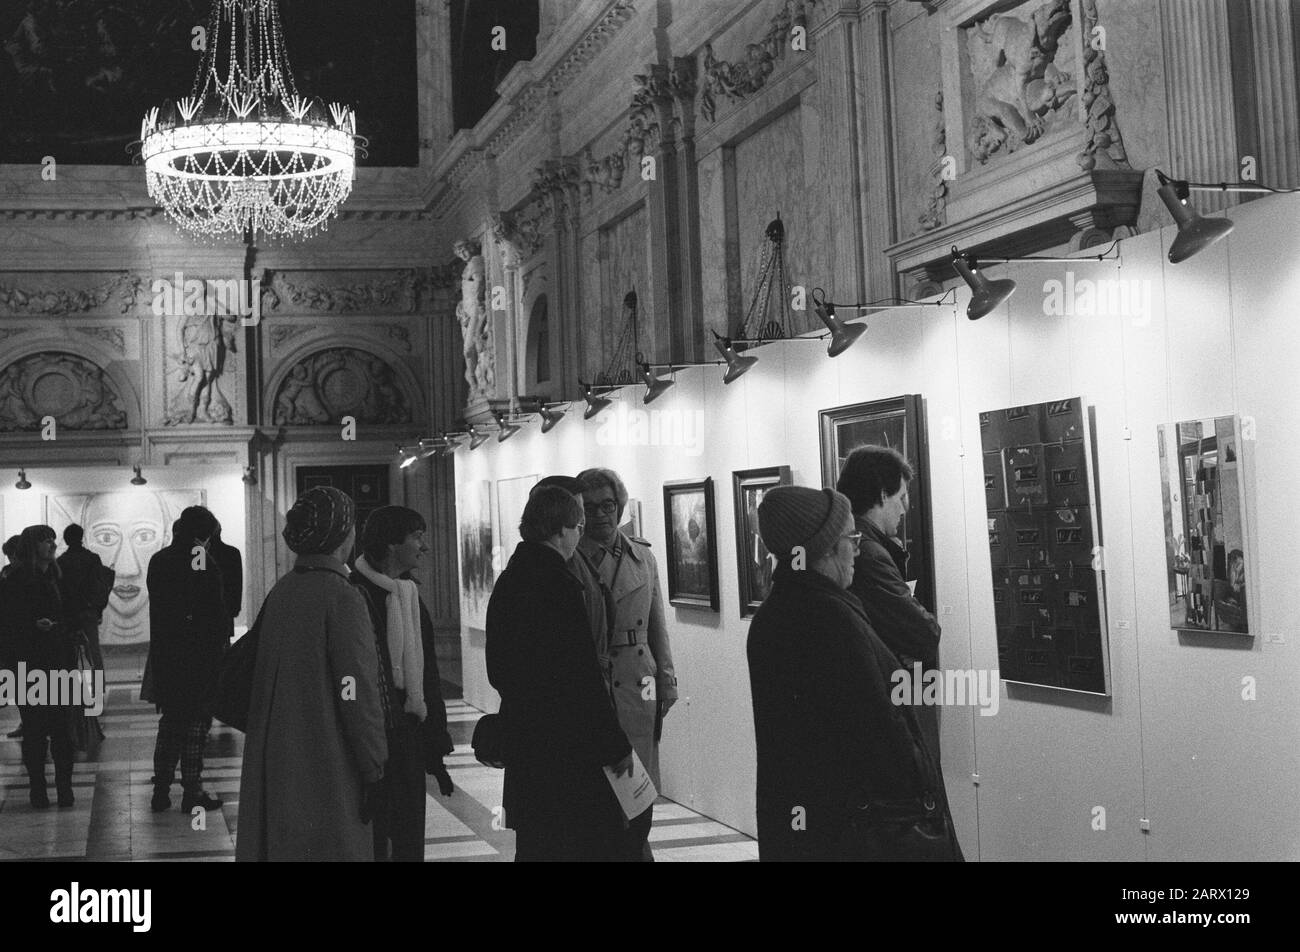 Tent. in Paleis op de Dam in A'dam of works by young artists until December 7, great interest at the tent. Date: November 27, 1980 Location: Amsterdam, Noord-Holland Keywords: ARTISTS, WORKS, exhibitions Institution name: Palace op de Dam Stock Photo